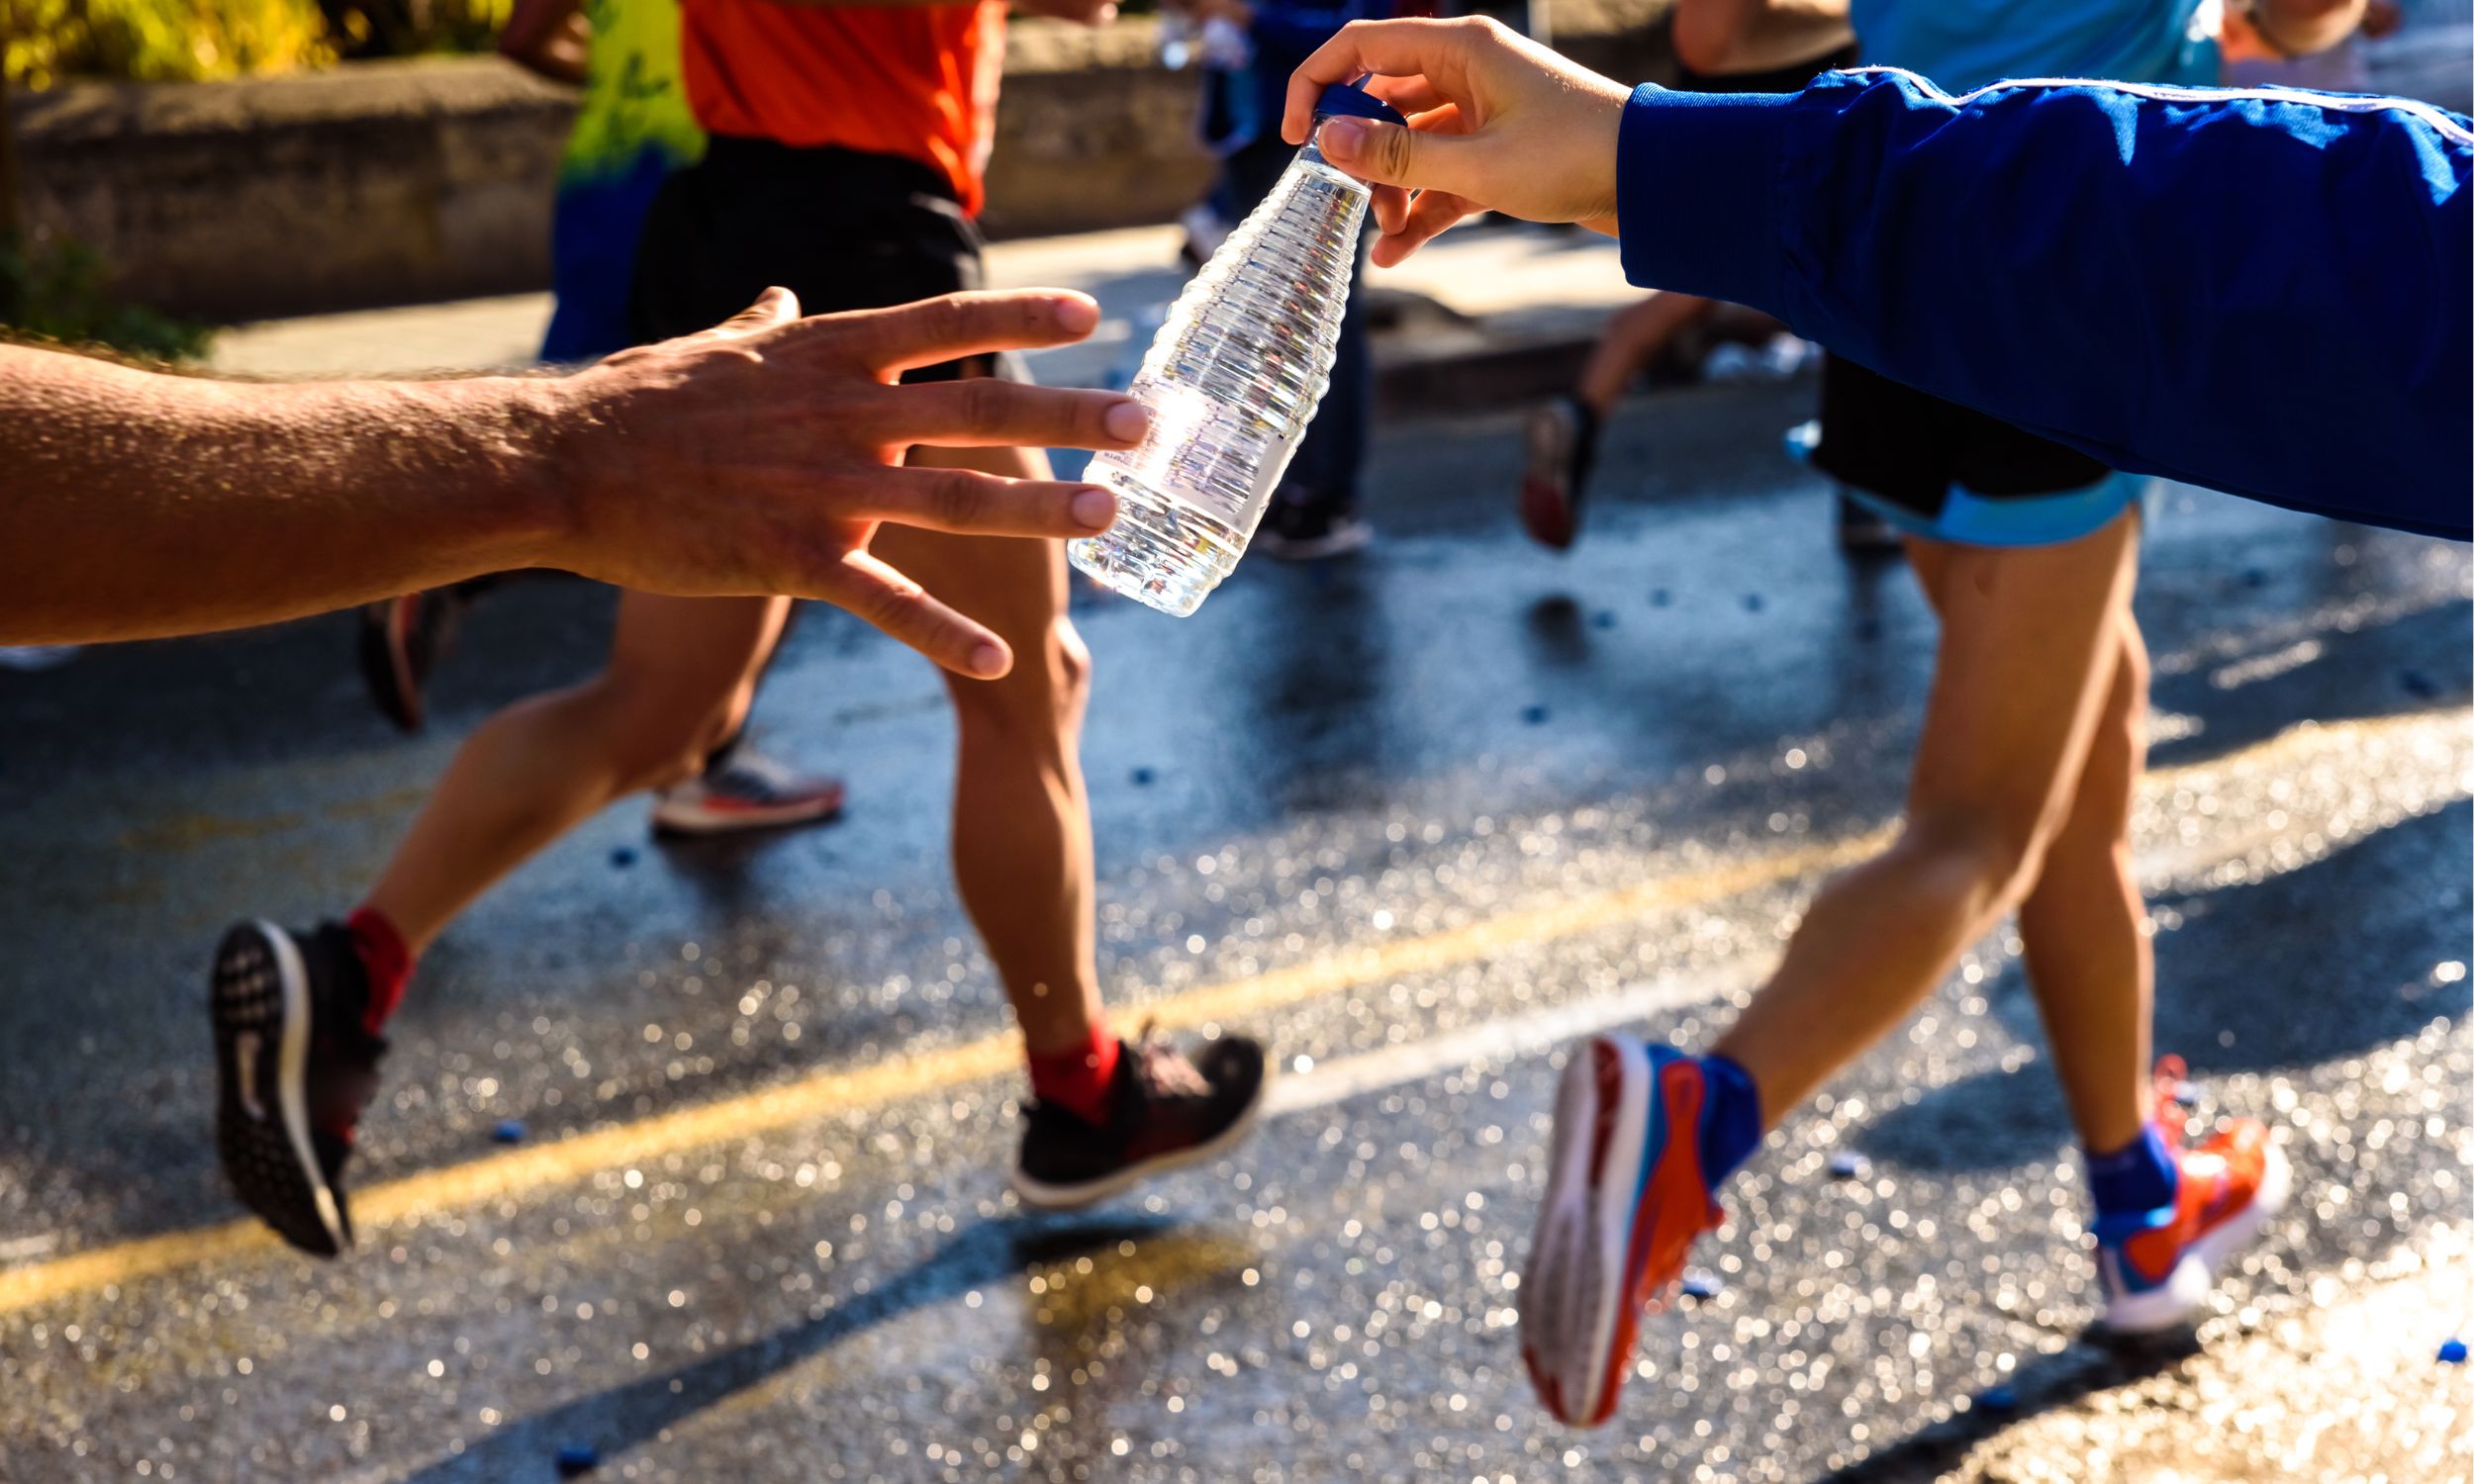 Runner grabbing a bottle of water during a race checkpoint